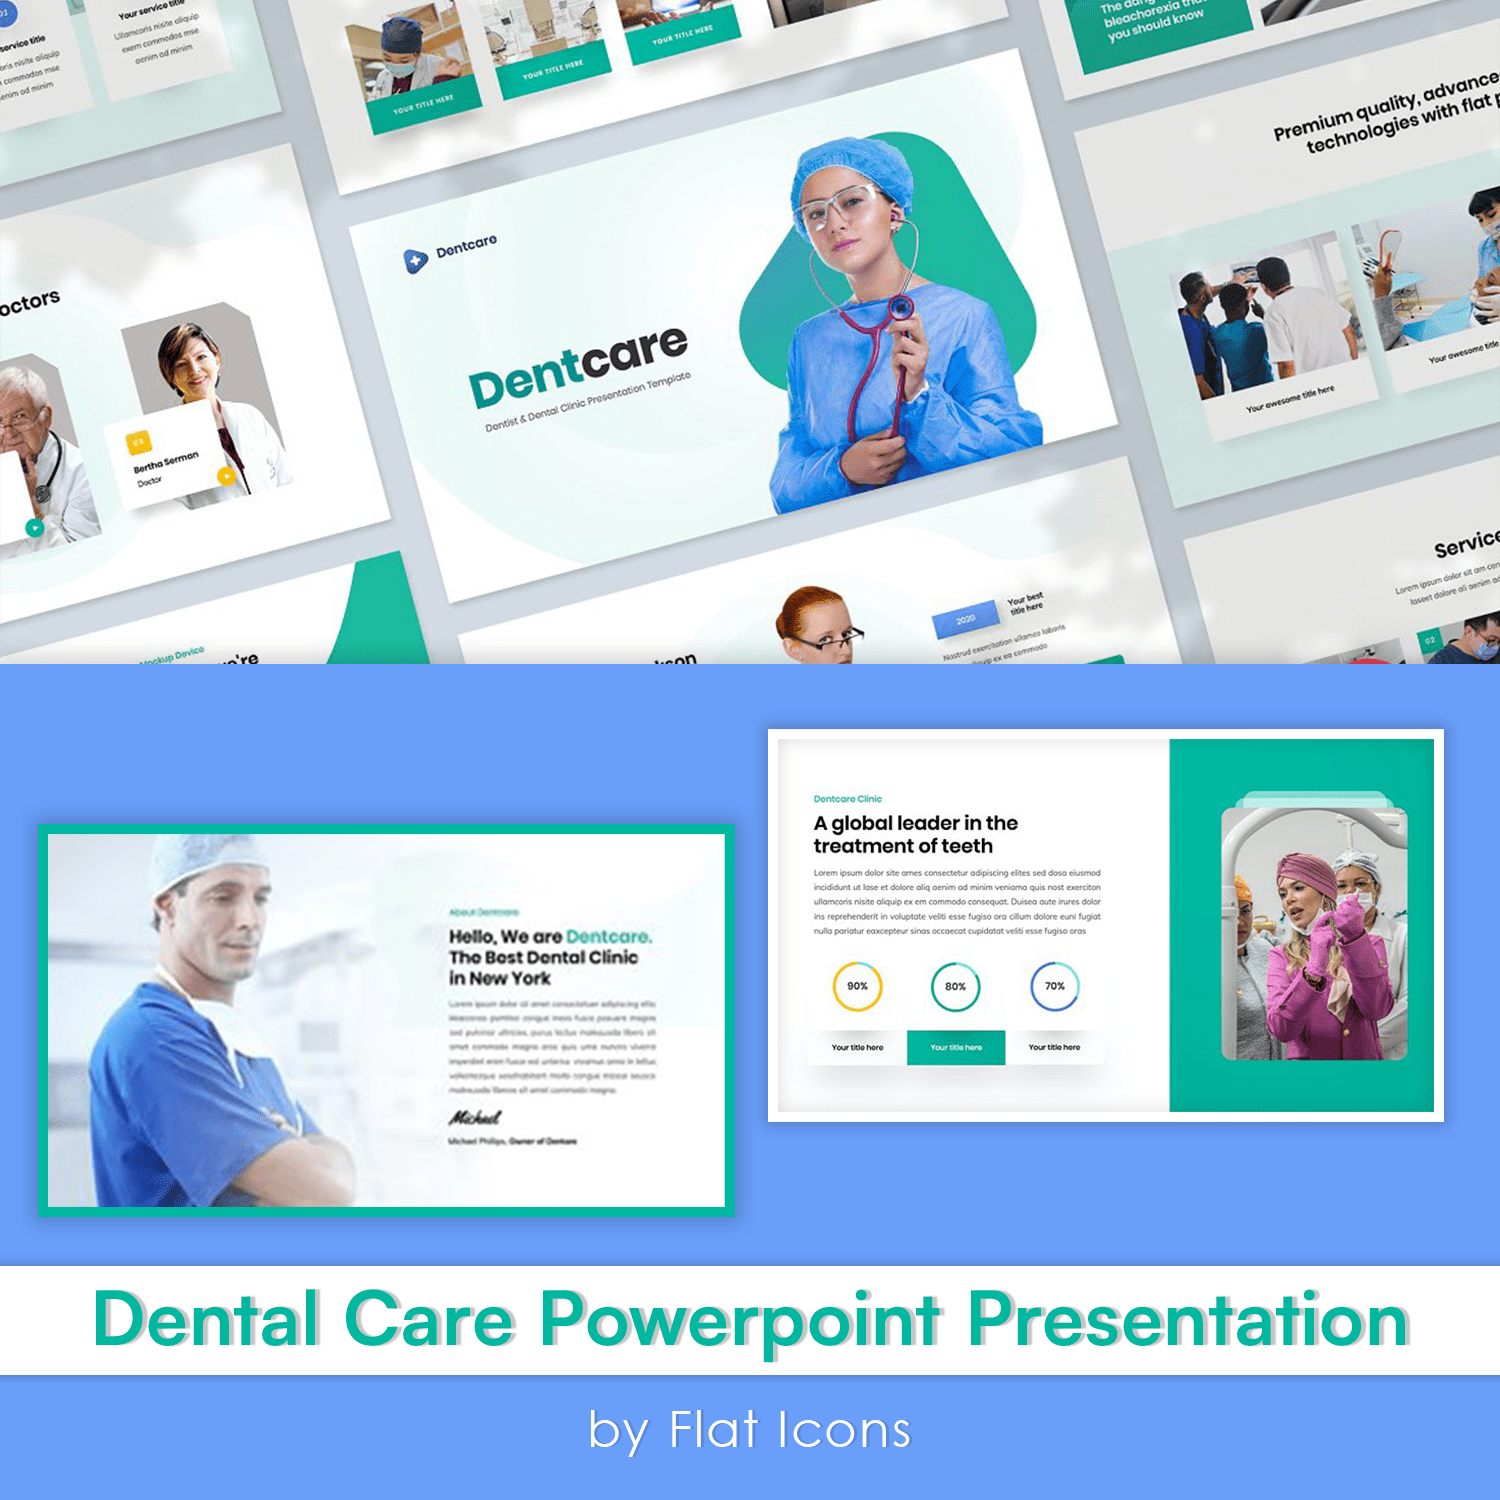 Dental Care PowerPoint Presentation cover image.